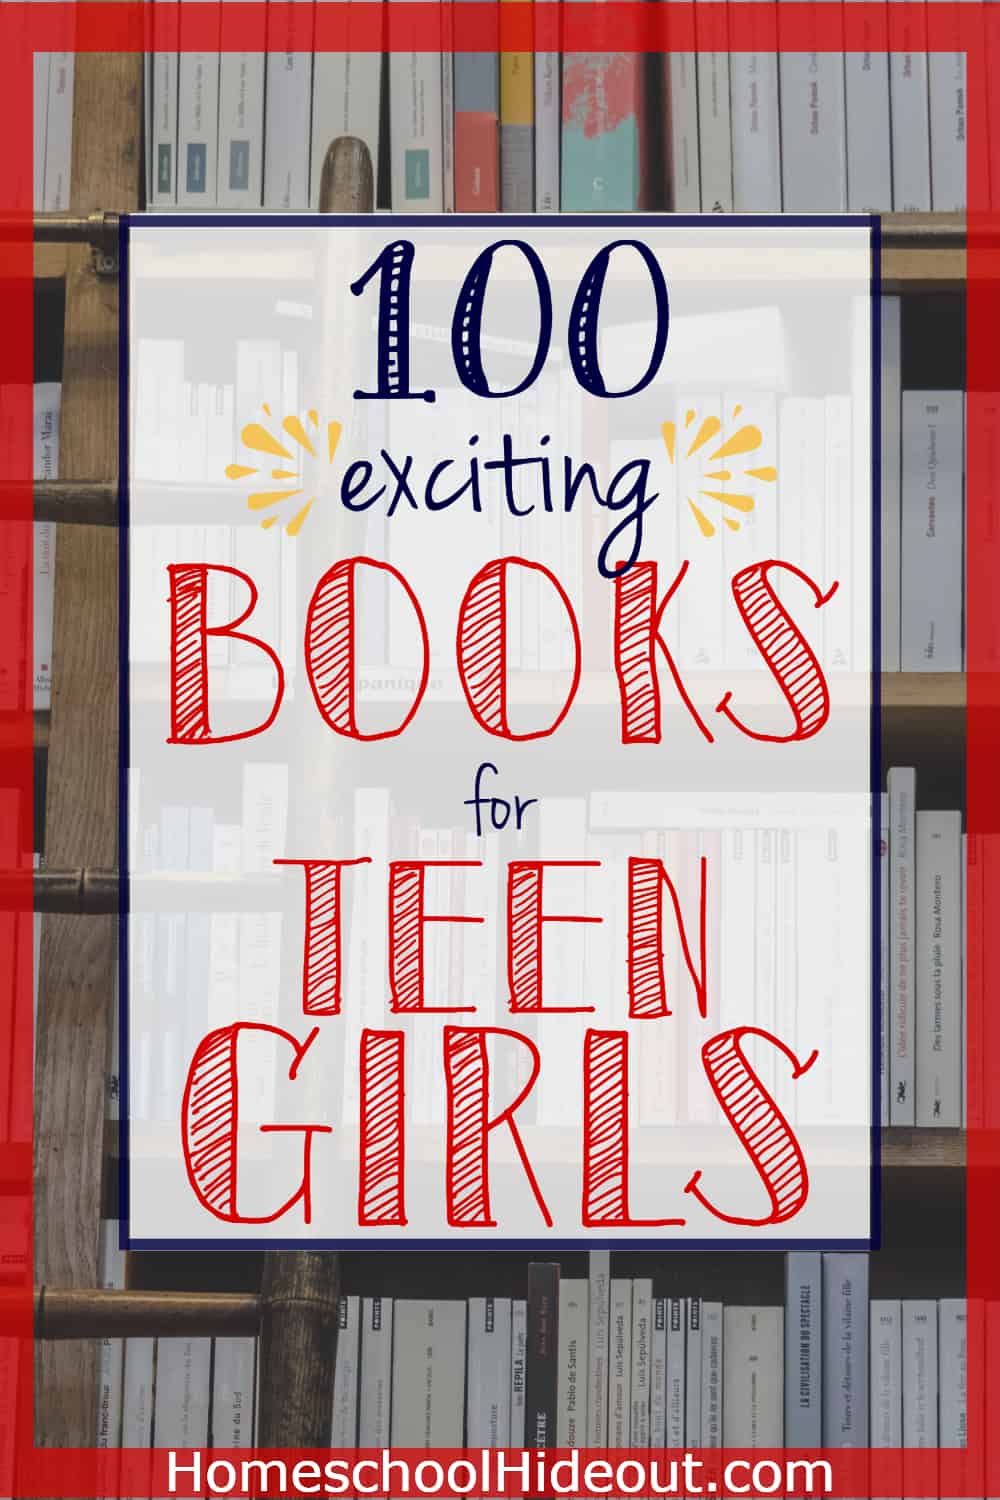 Books for teen girls don't have to be dull. With adventure, mystery and a splash of love, these books have topped our reading list!